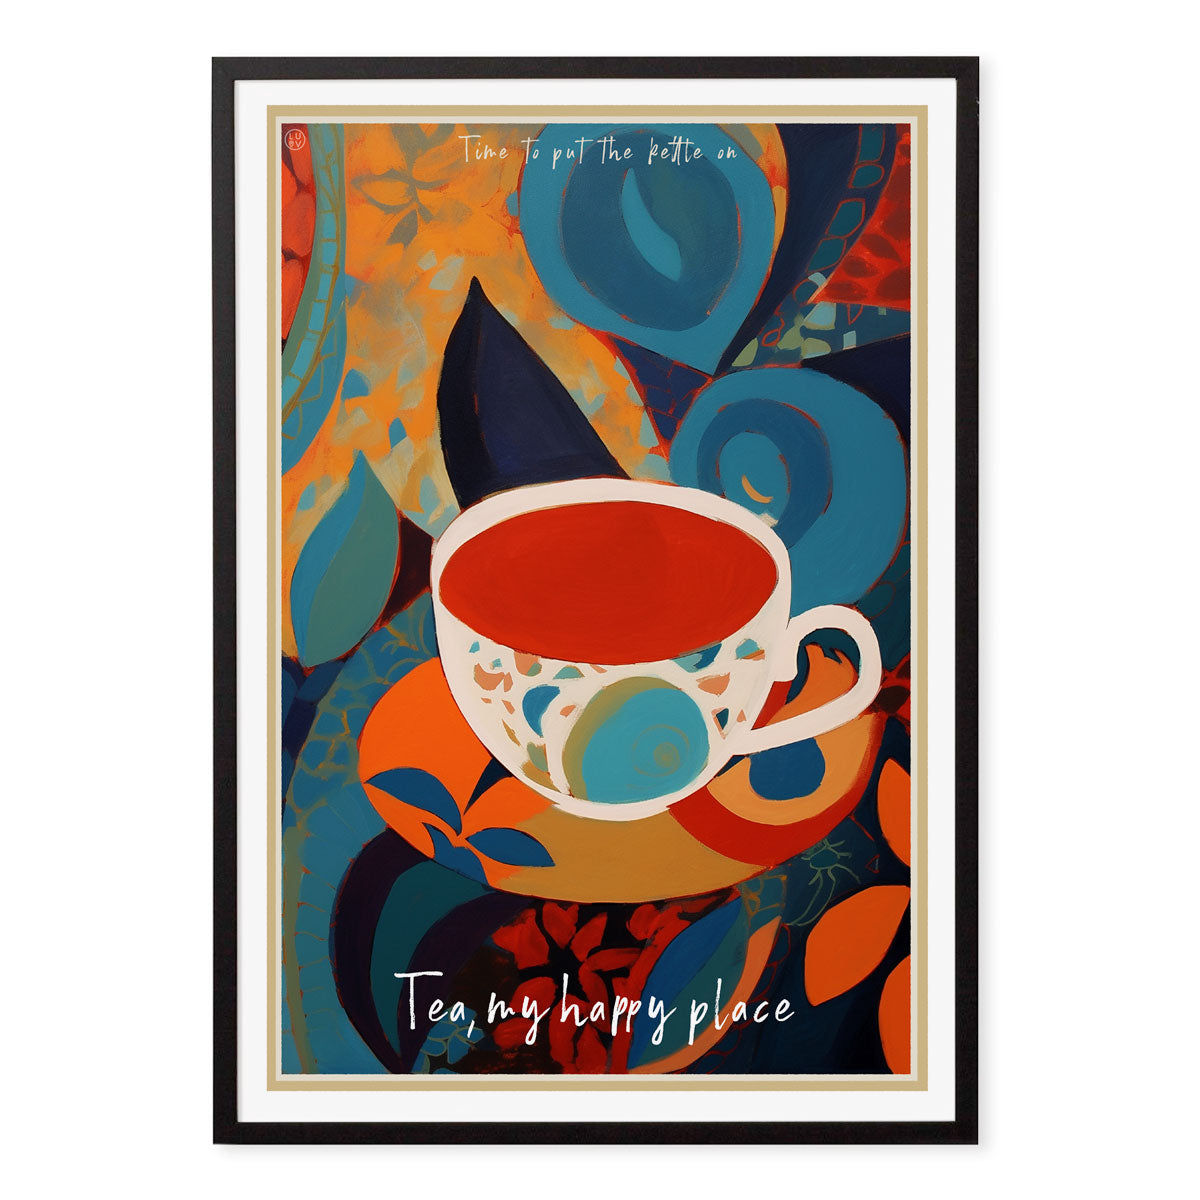 English Tea retro vintage poster print in black frame from Places We Luv